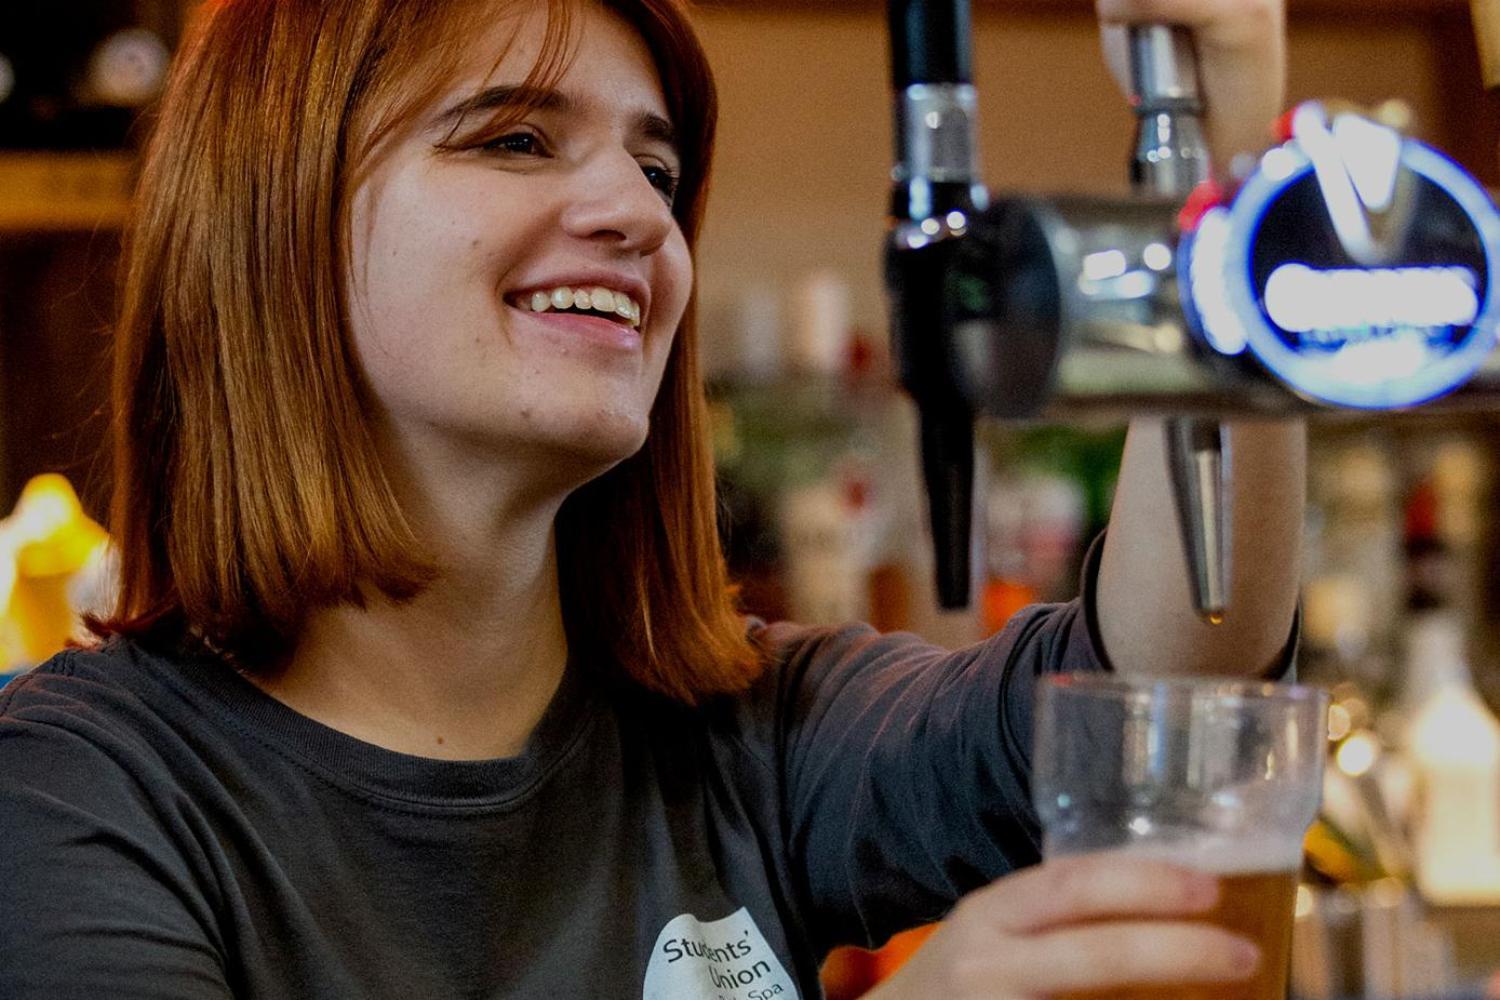 A female member of bar staff pours a drink